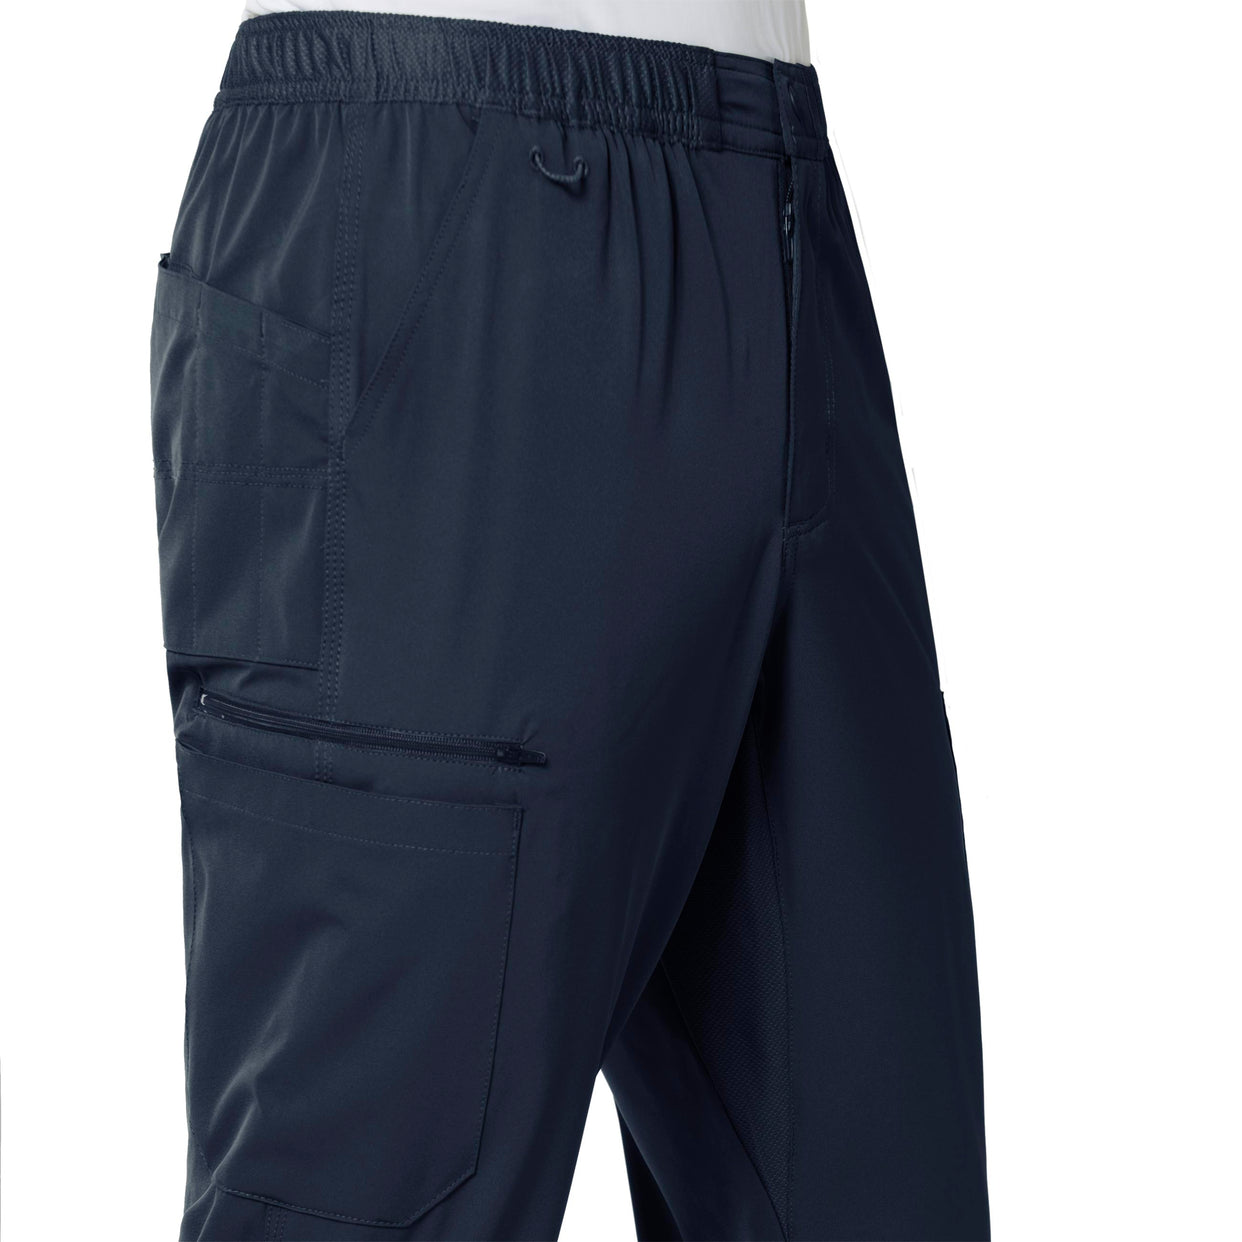 Force Liberty Men's Athletic Cargo Scrub Pant Navy side detail 2